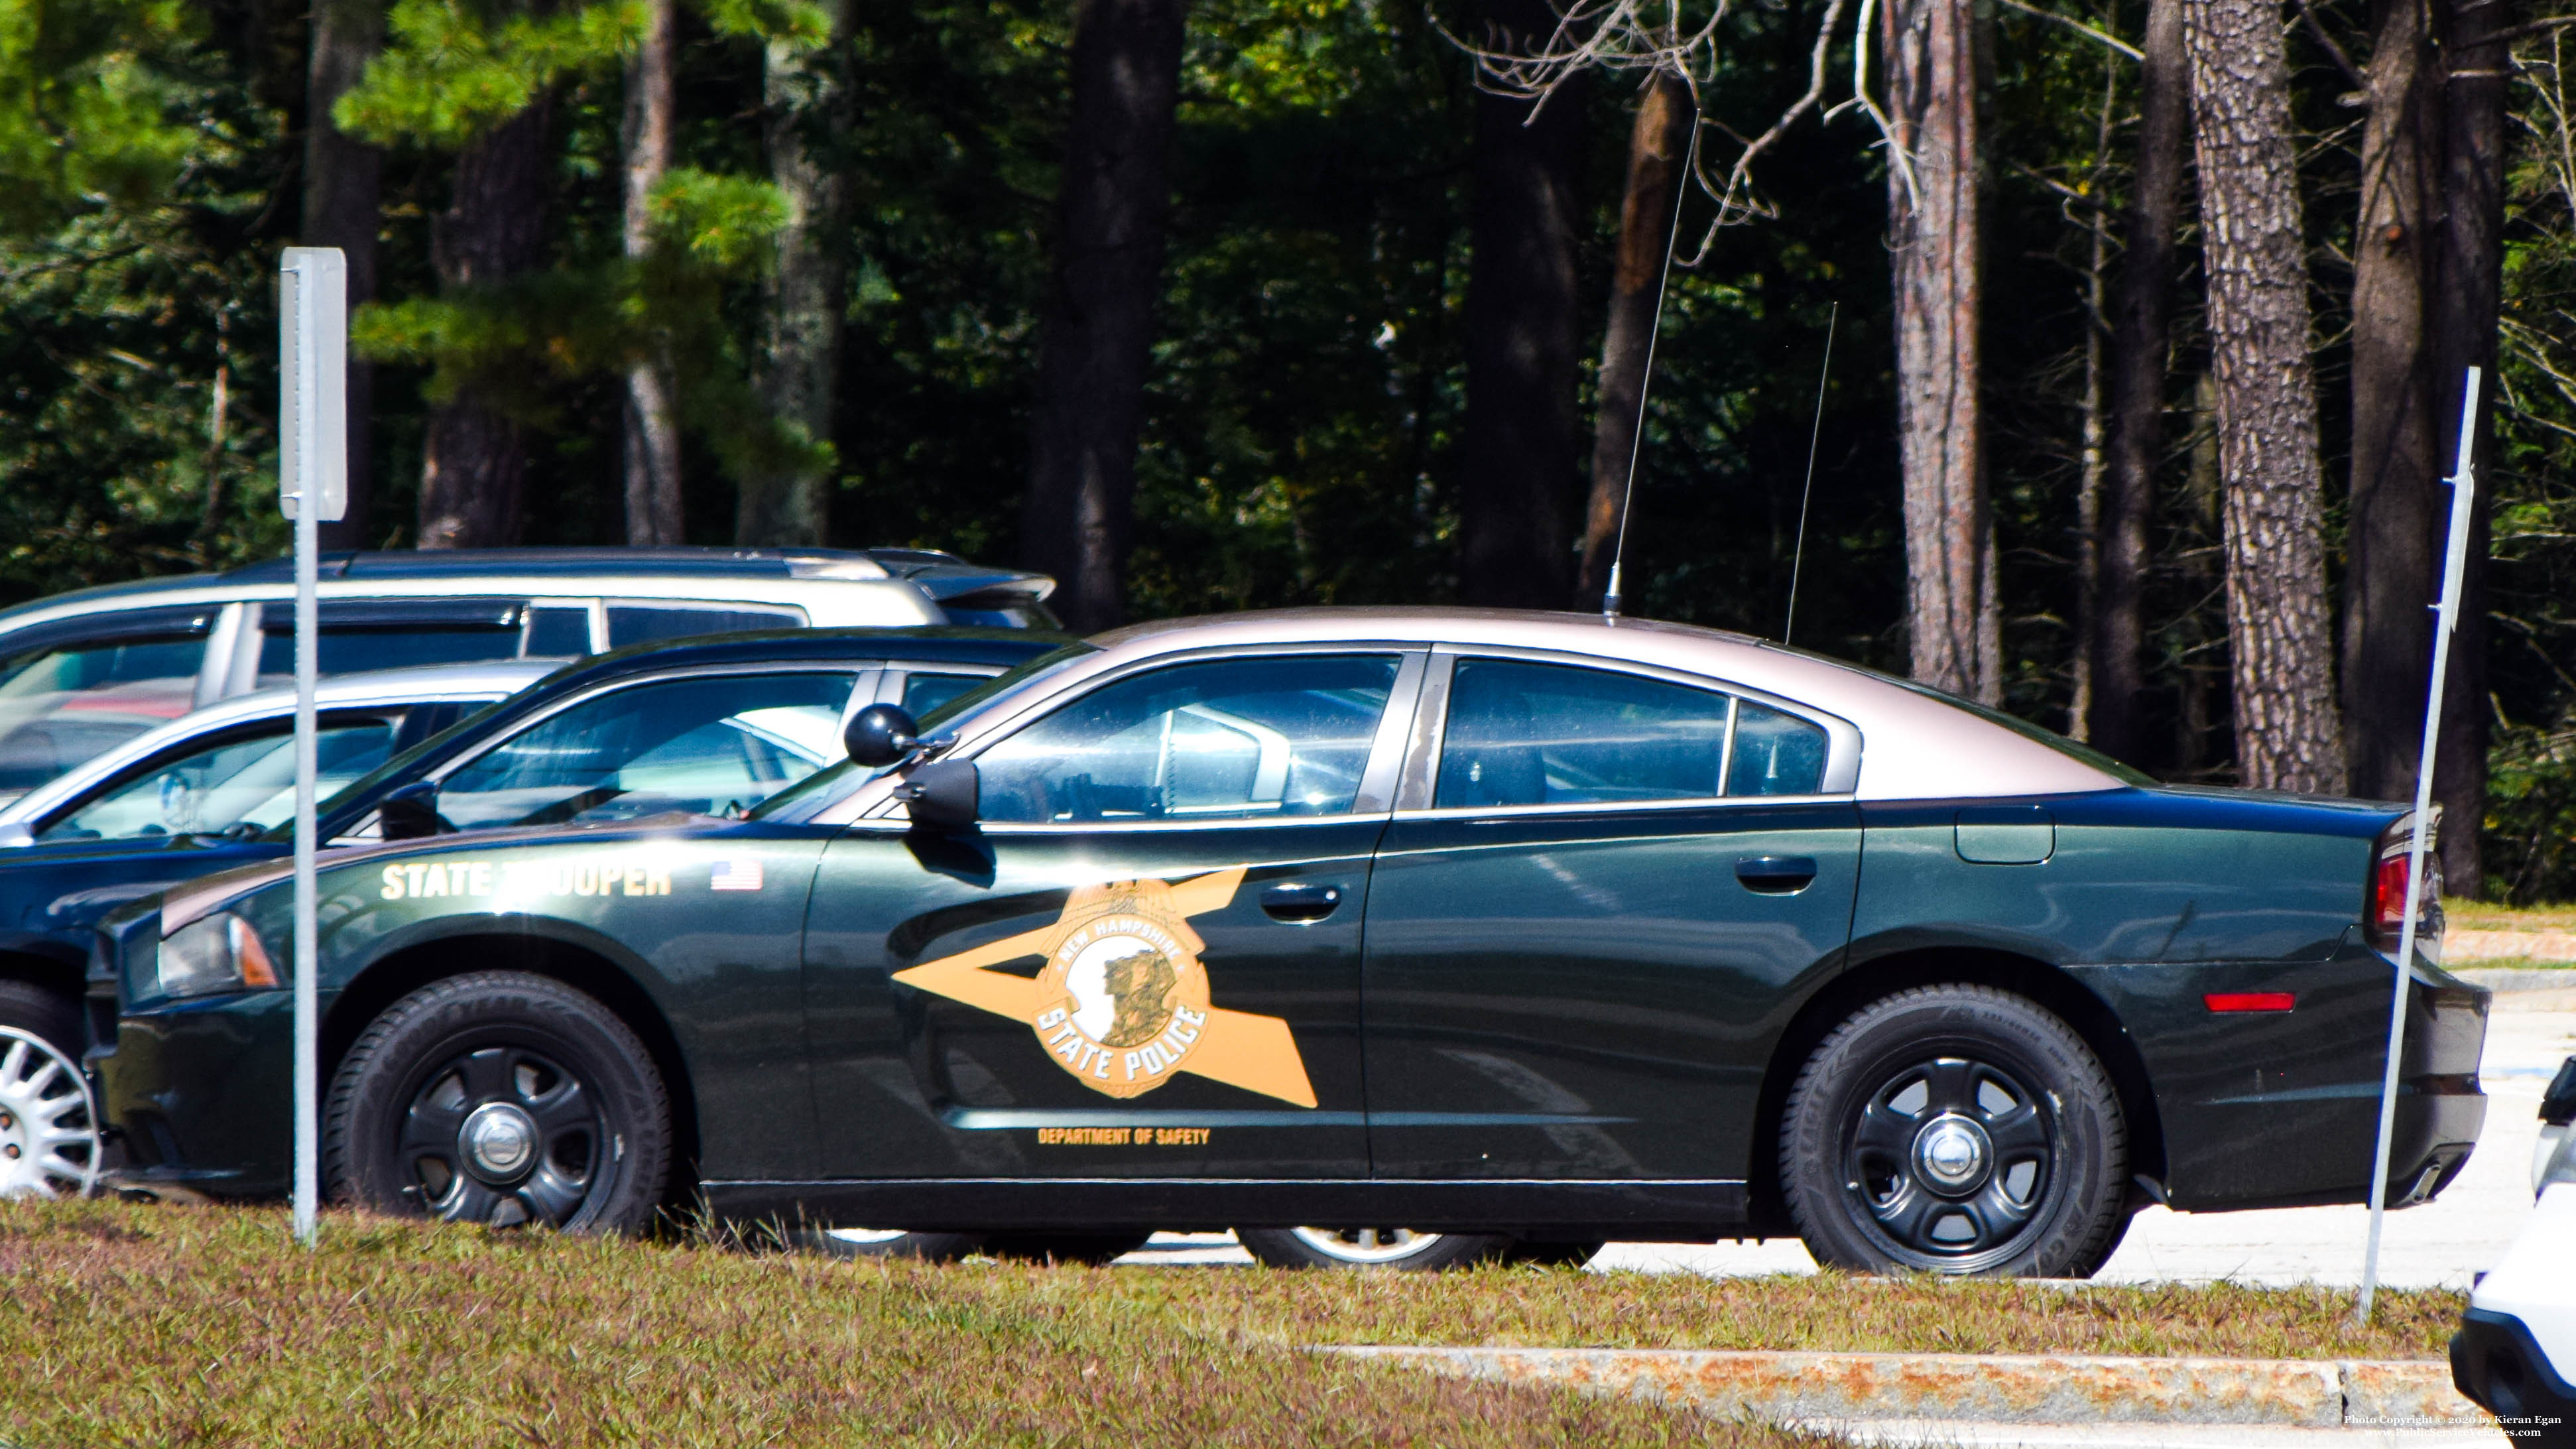 A photo  of New Hampshire State Police
            Cruiser 19, a 2011-2014 Dodge Charger             taken by Kieran Egan